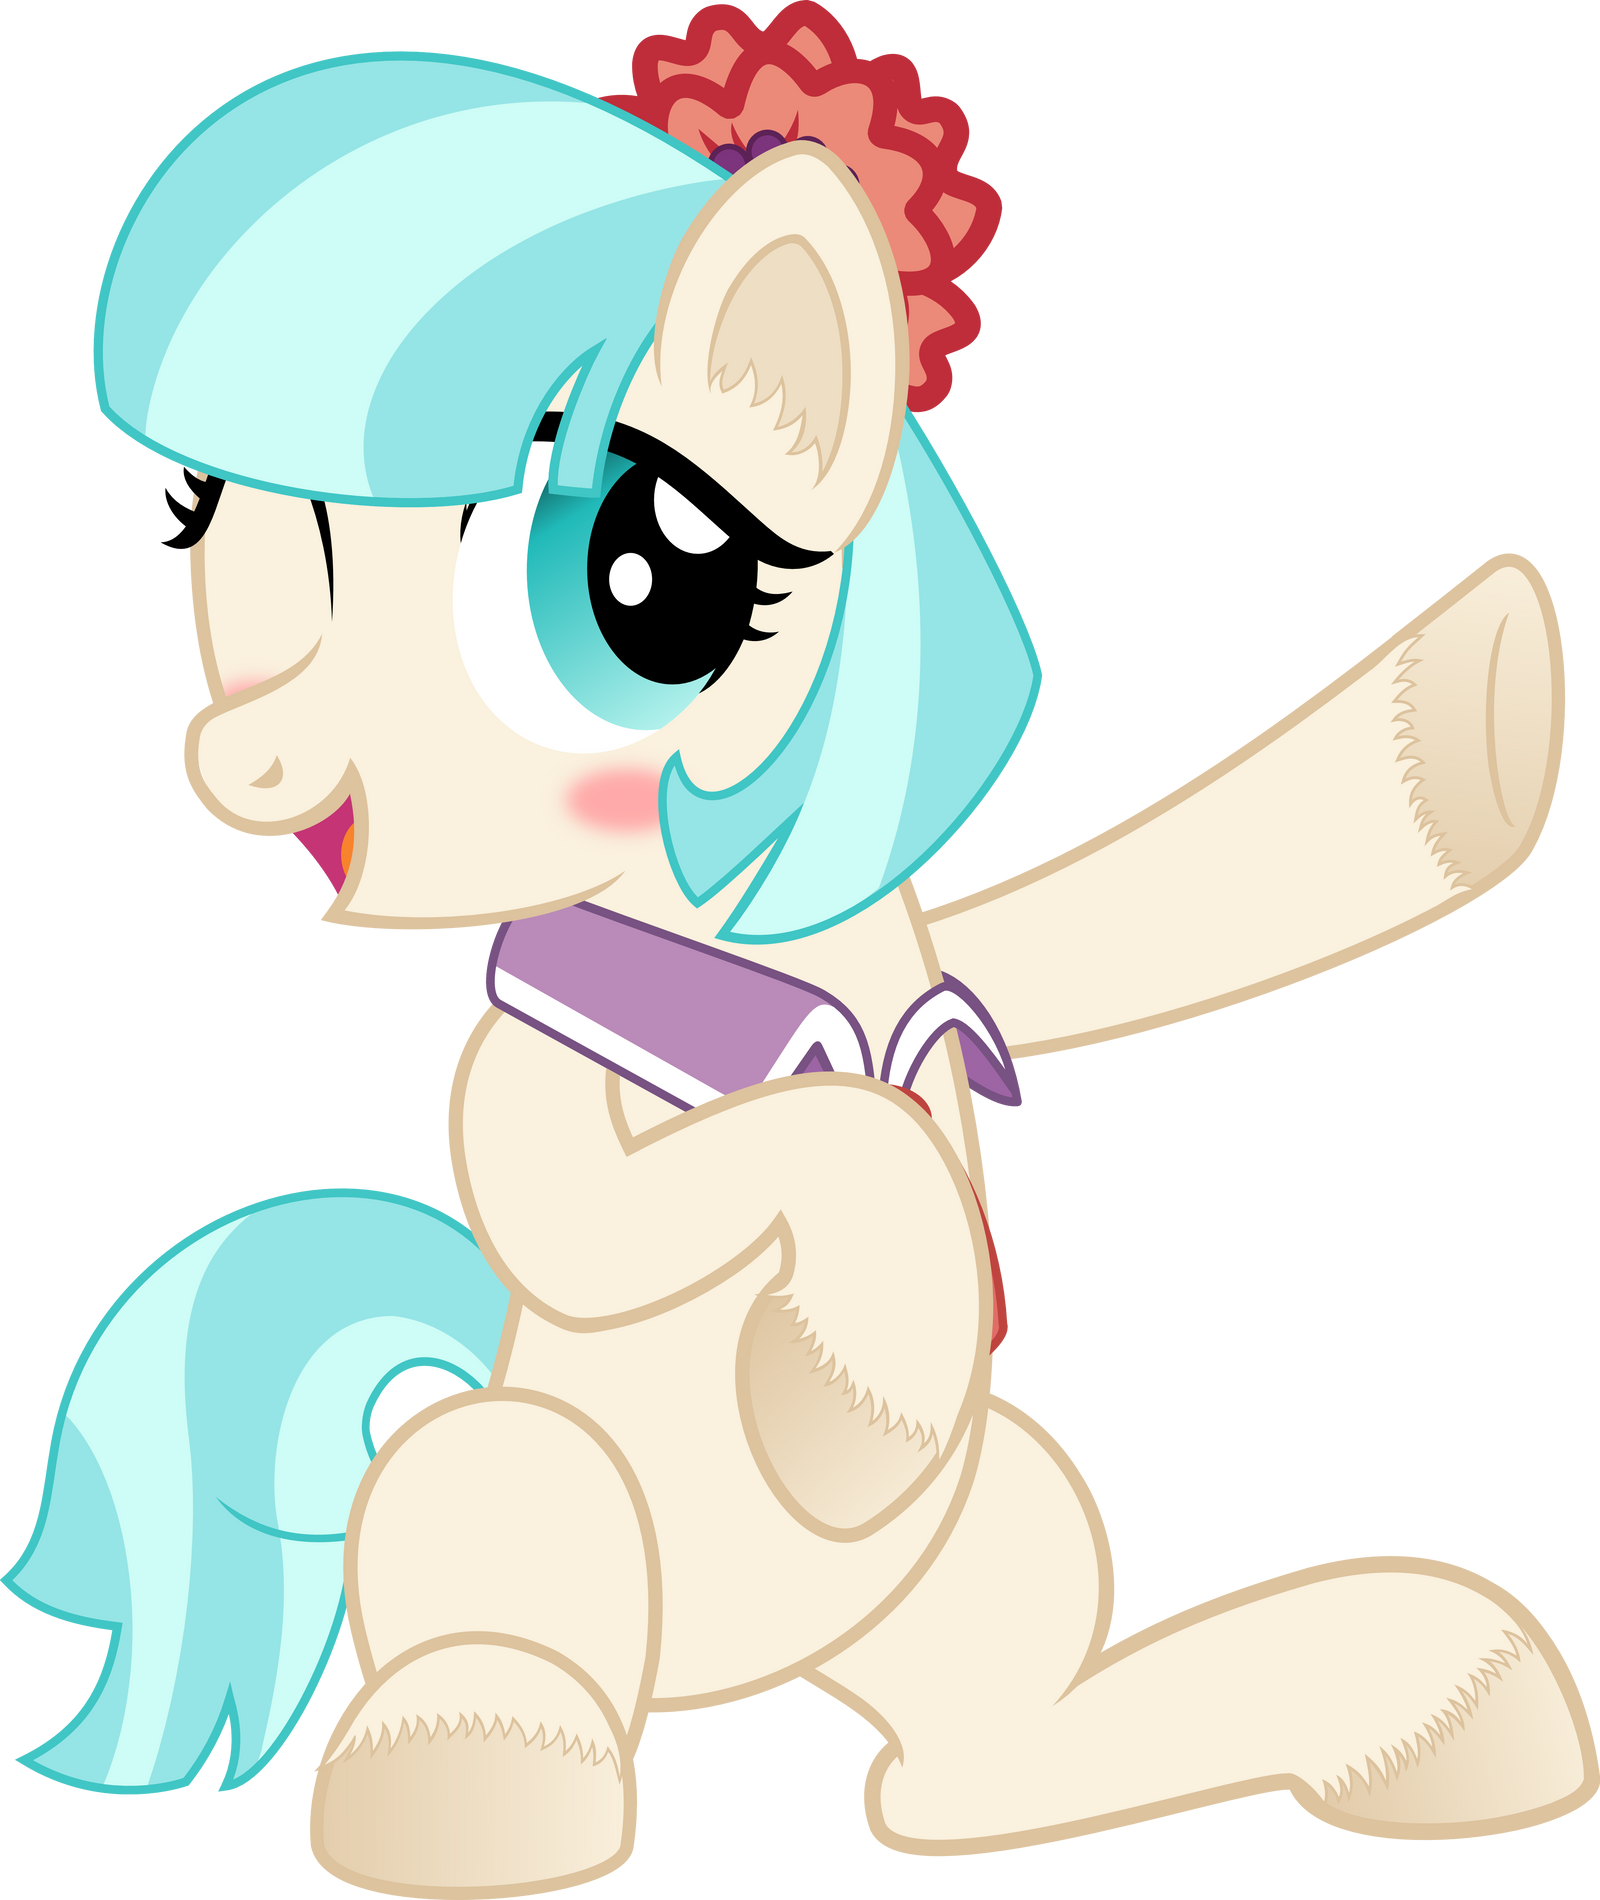 coco_pommel_by_age3rcm-d70wyaa.png